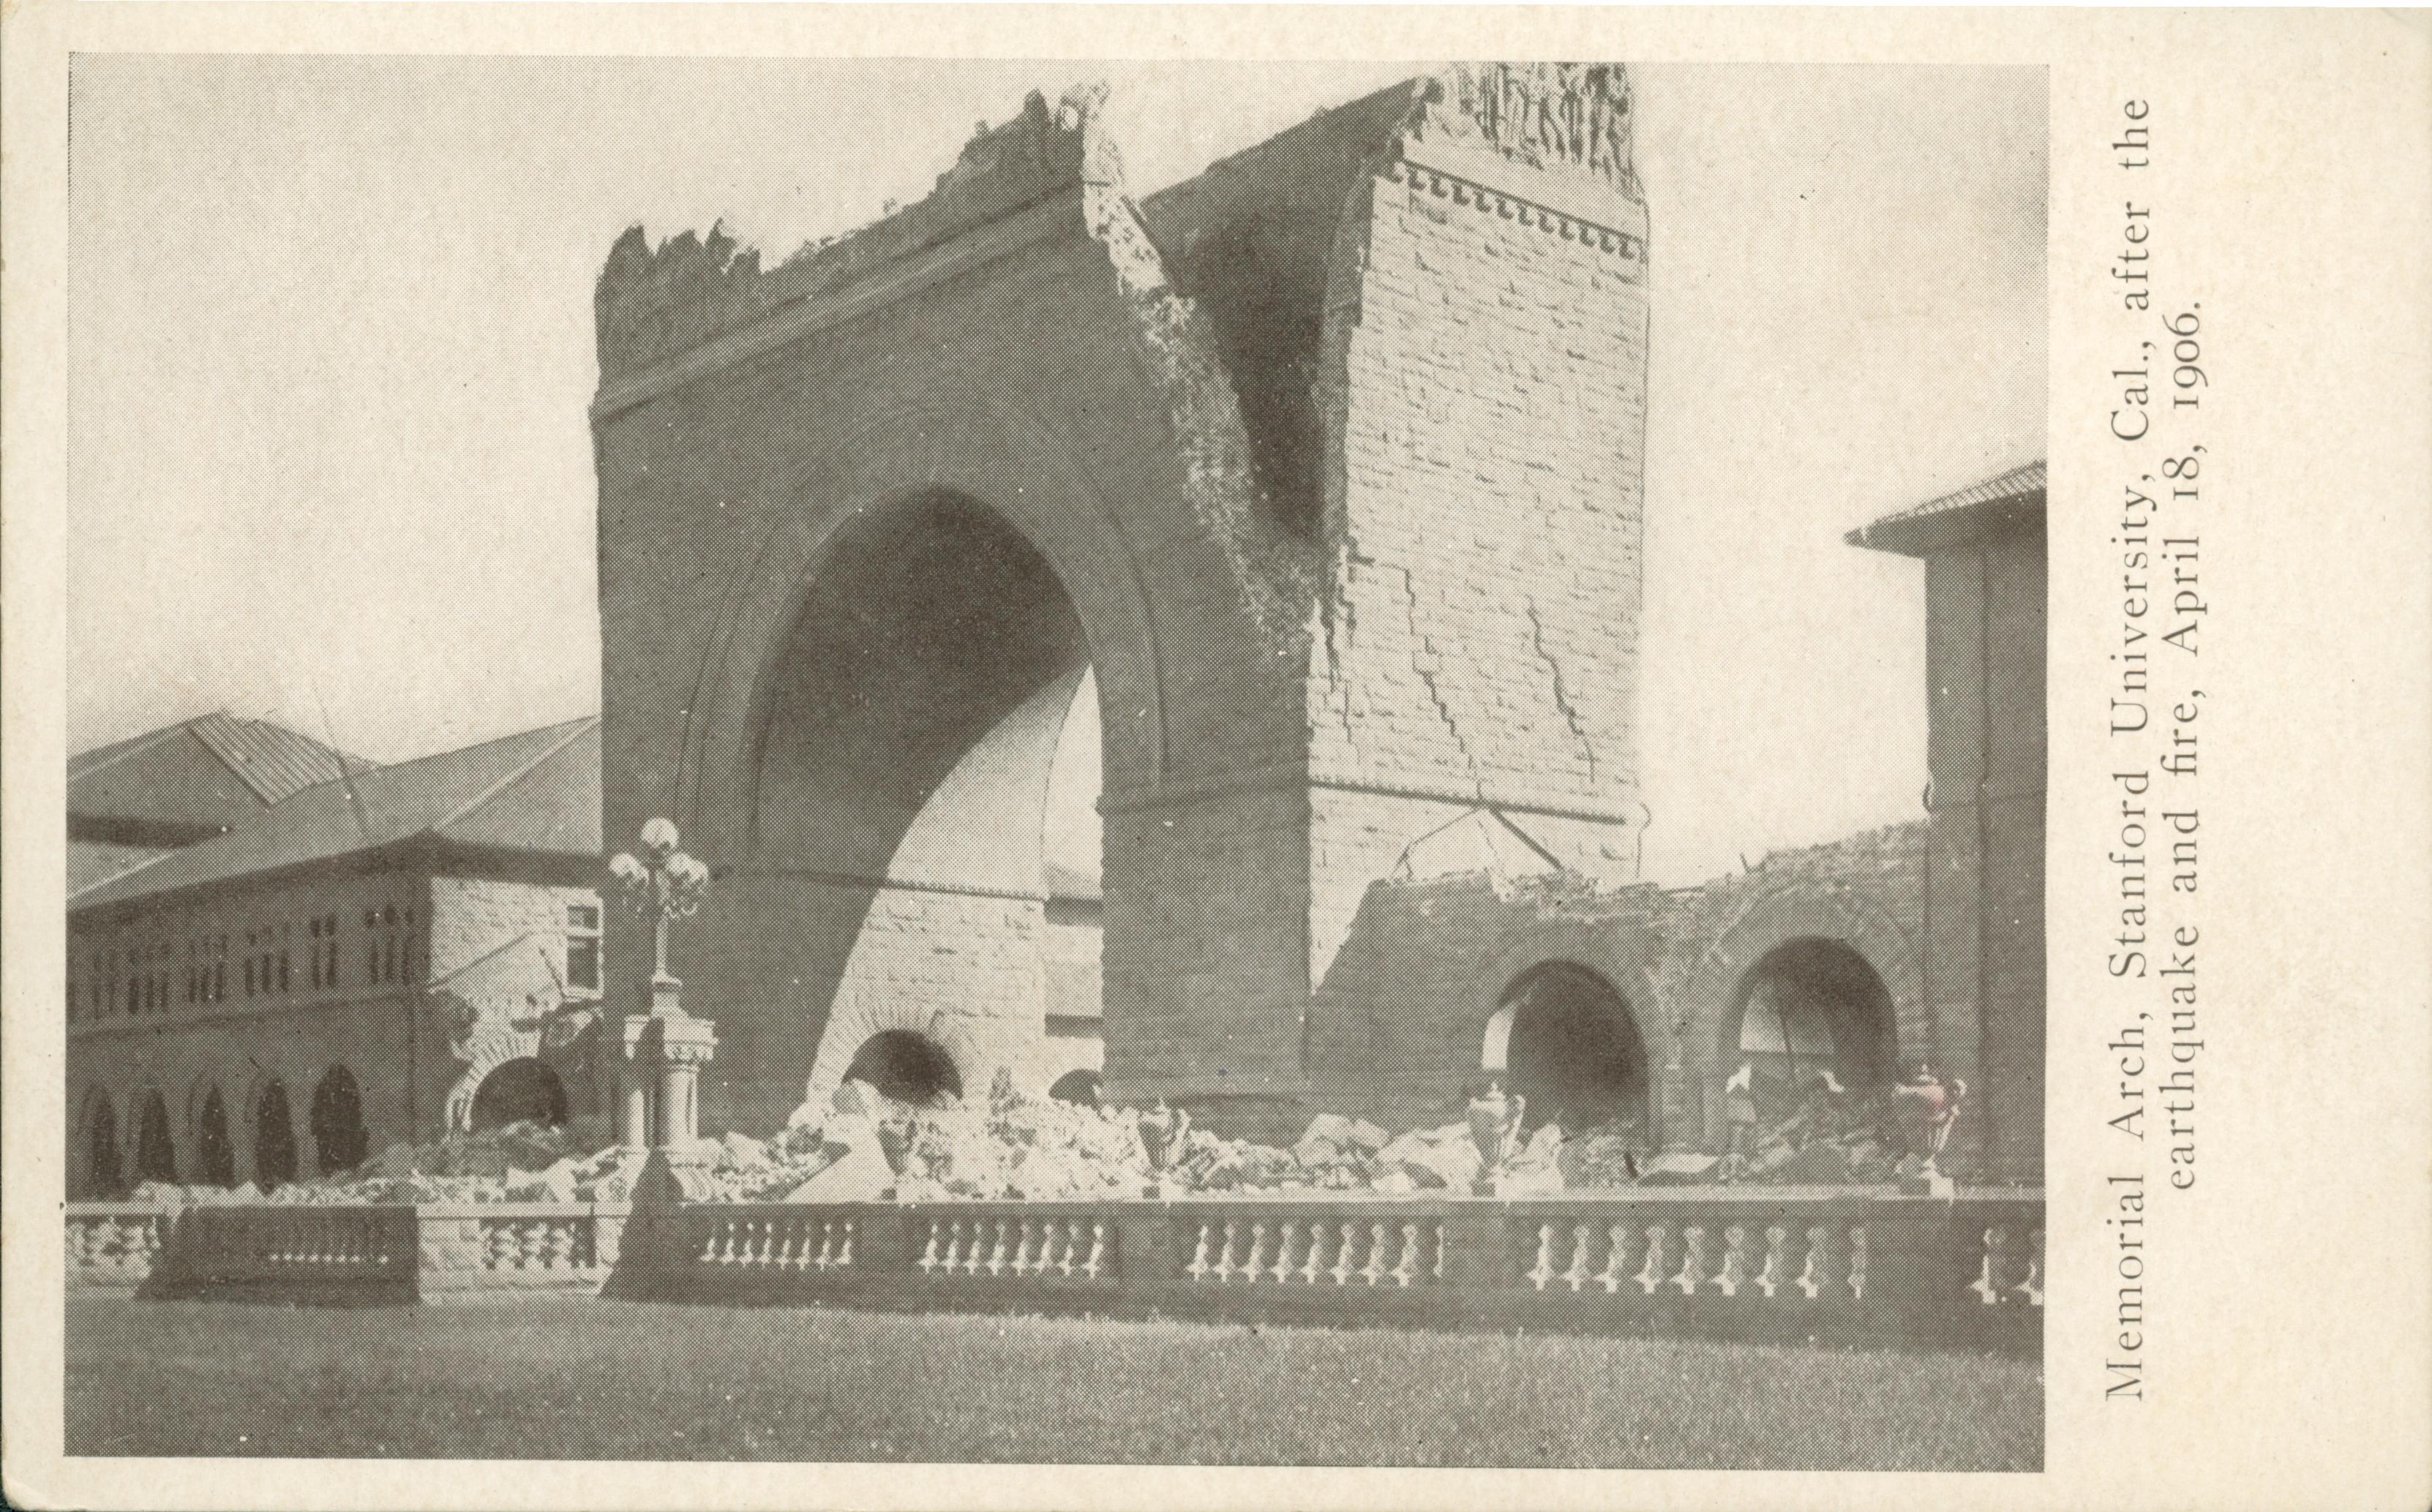 View of the destroyed Memorial Arch at Stanford University after the 1906 earthquake